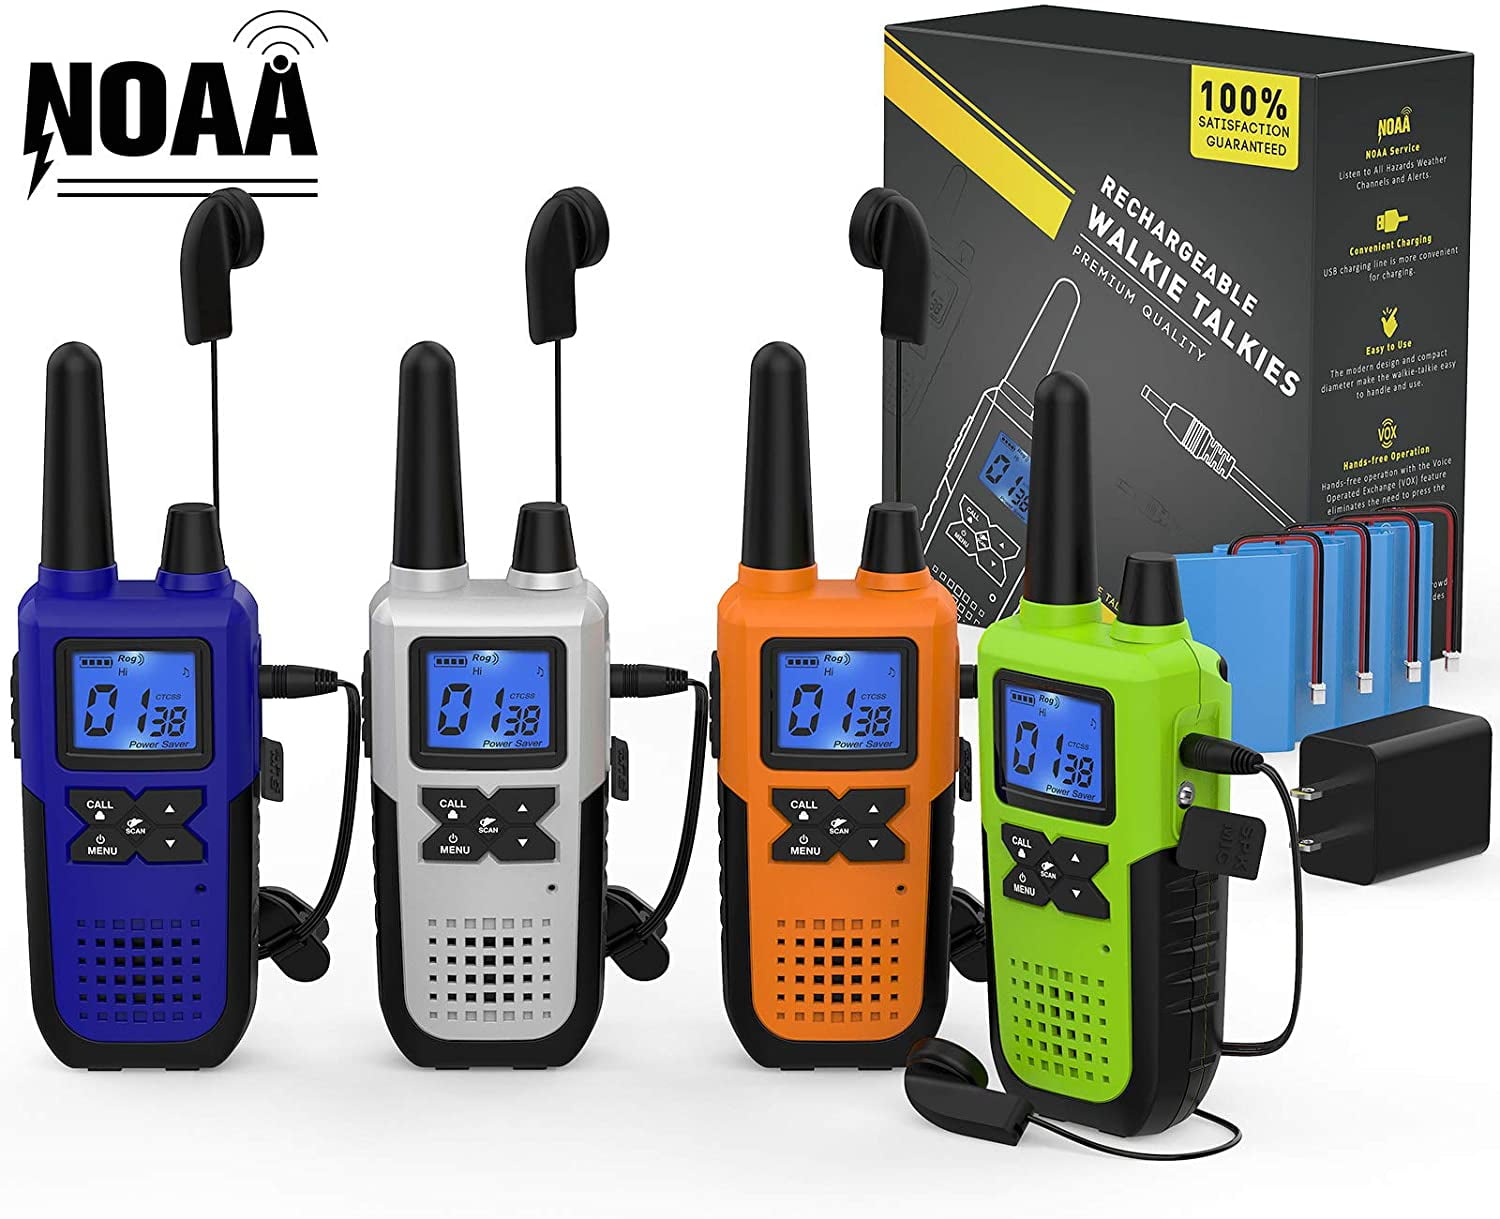 Long Range Walkie Talkies Rechargeable for Adults NOAA Way Radios  Walkie Talkies Pack Long Distance Walkie-Talkies with Earpiece and Mic  Set Headsets USB Charger Battery Weather Alert